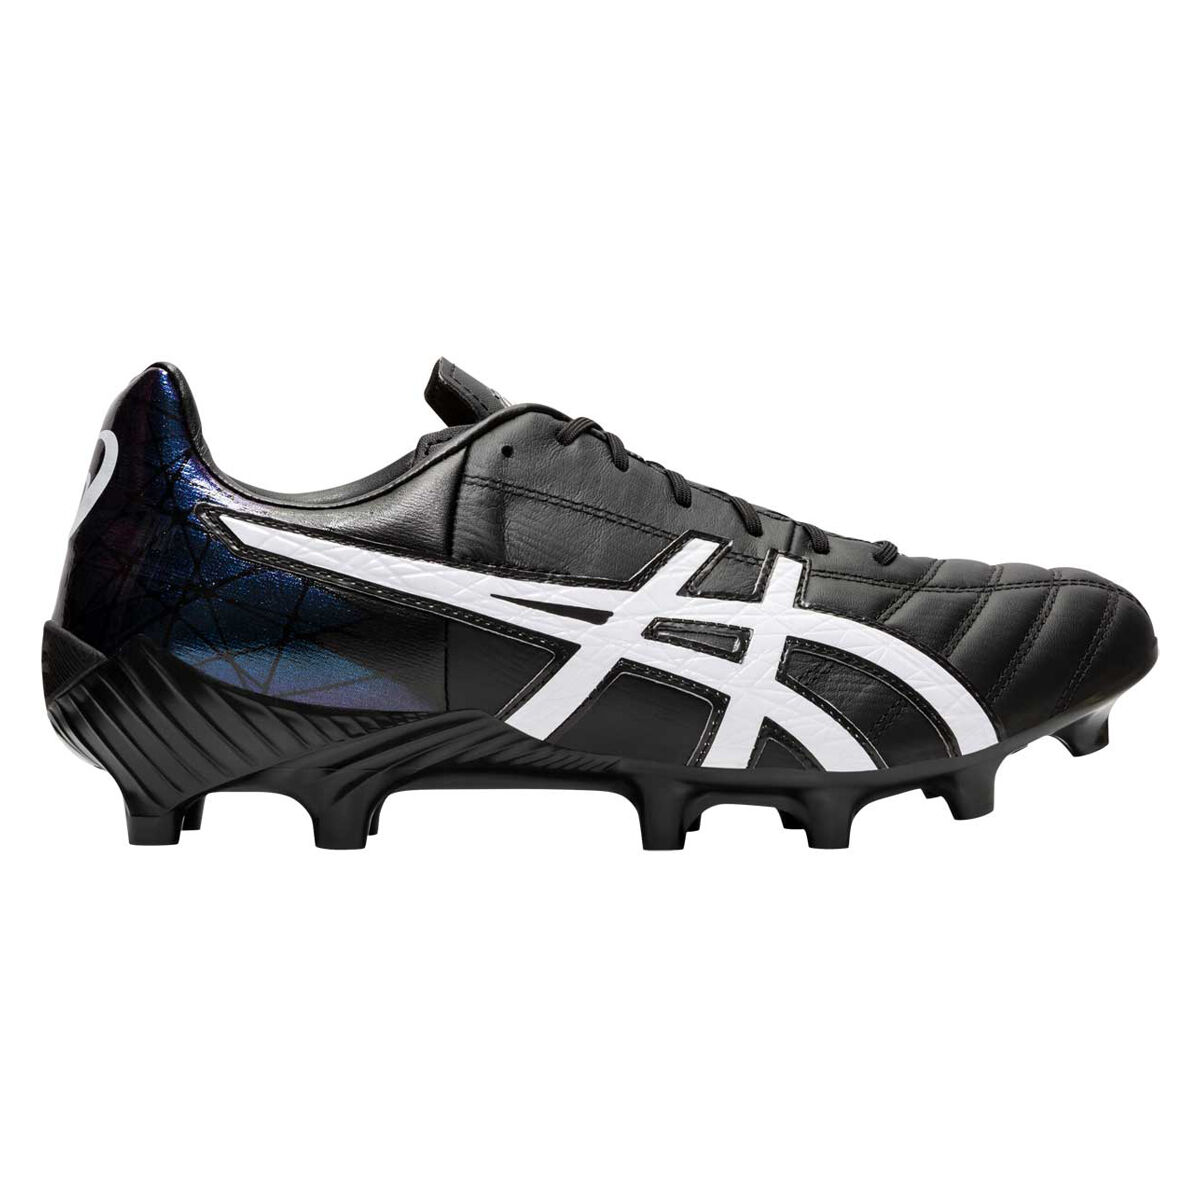 Asics Lethal Tigreor IT Football Boots 